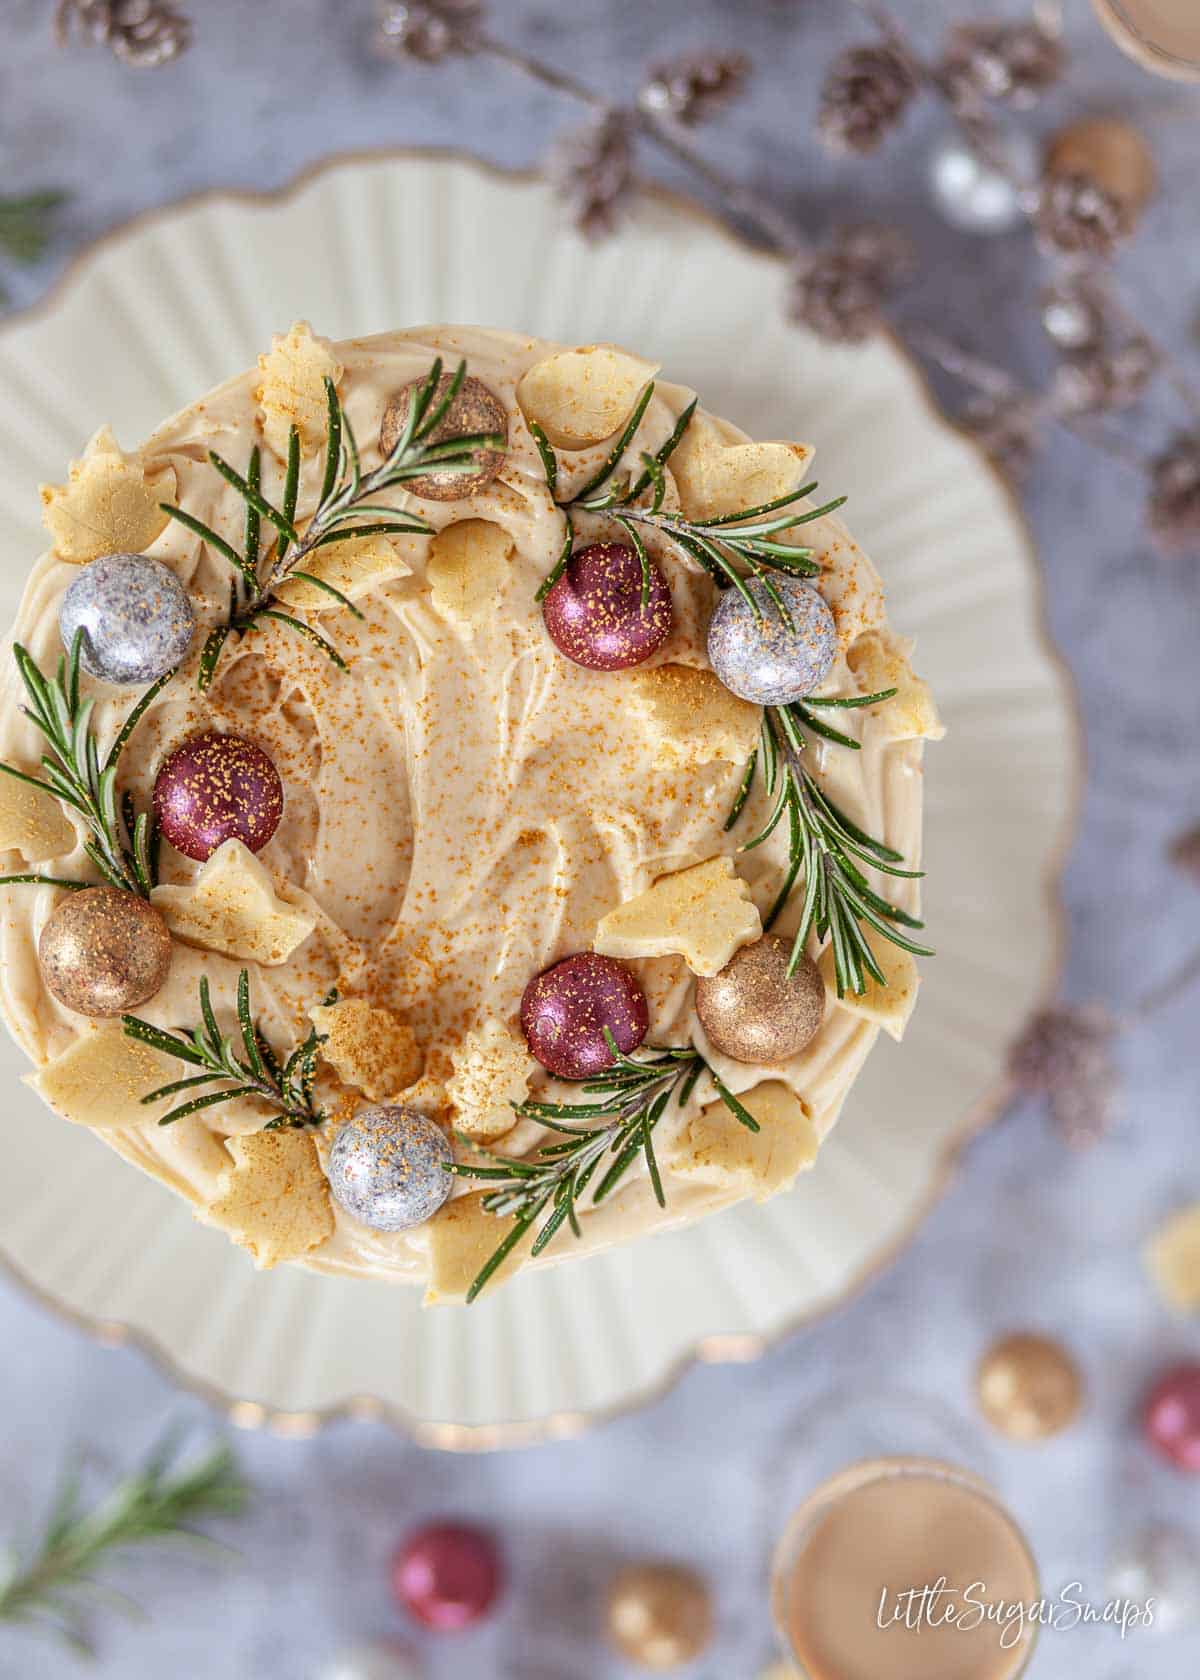 Overhead view of a festive cake decorated with mascarpone frosting, chocolates and rosemary